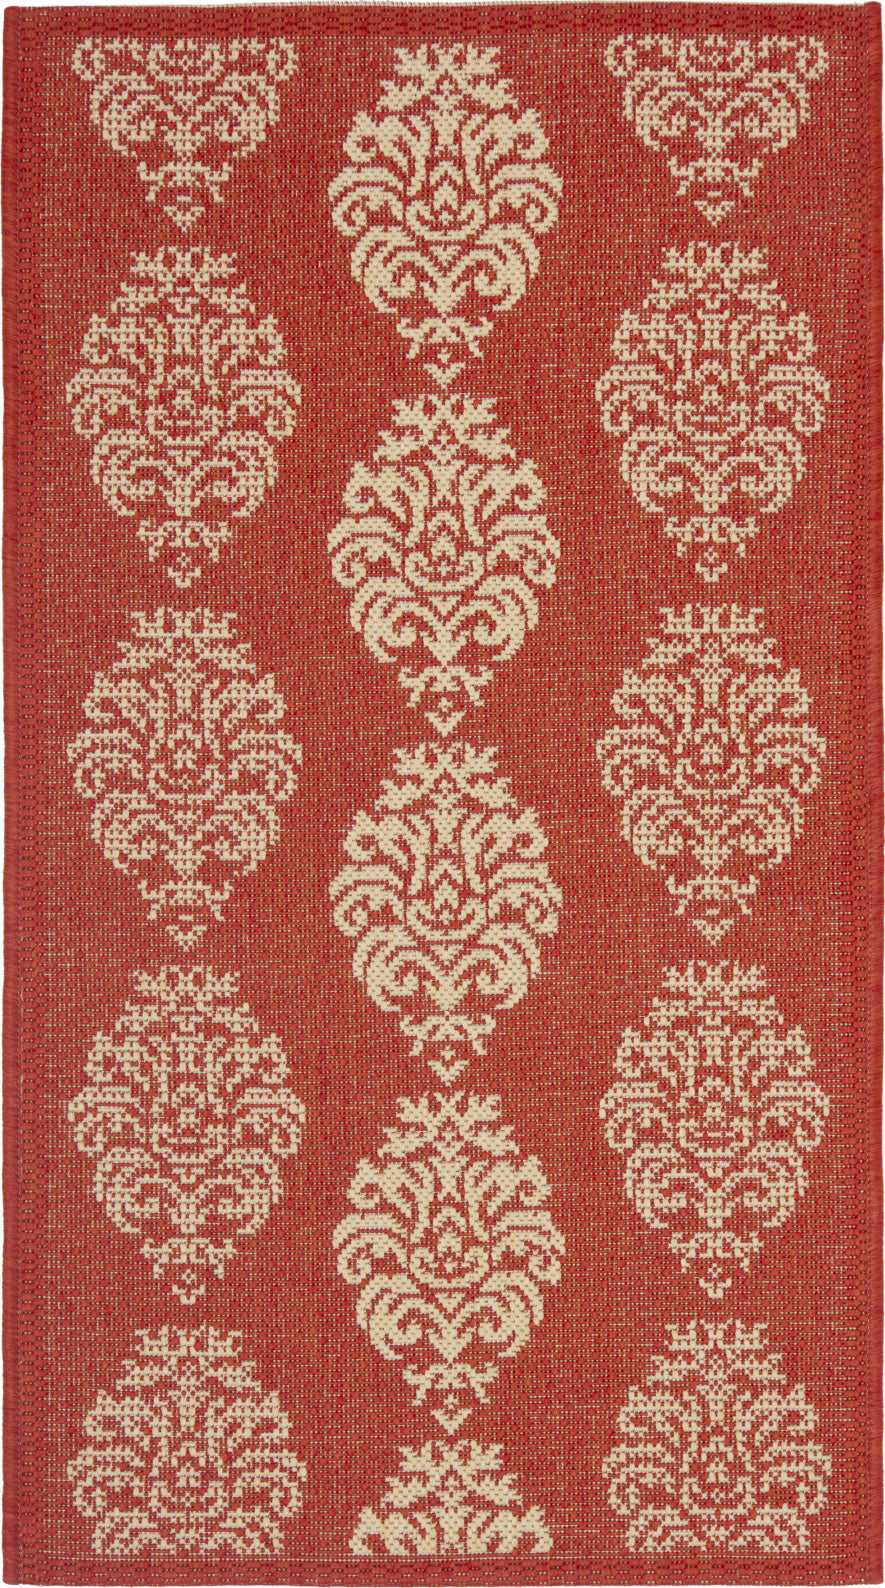 Safavieh Courtyard CY2720 Red/Natural Area Rug main image